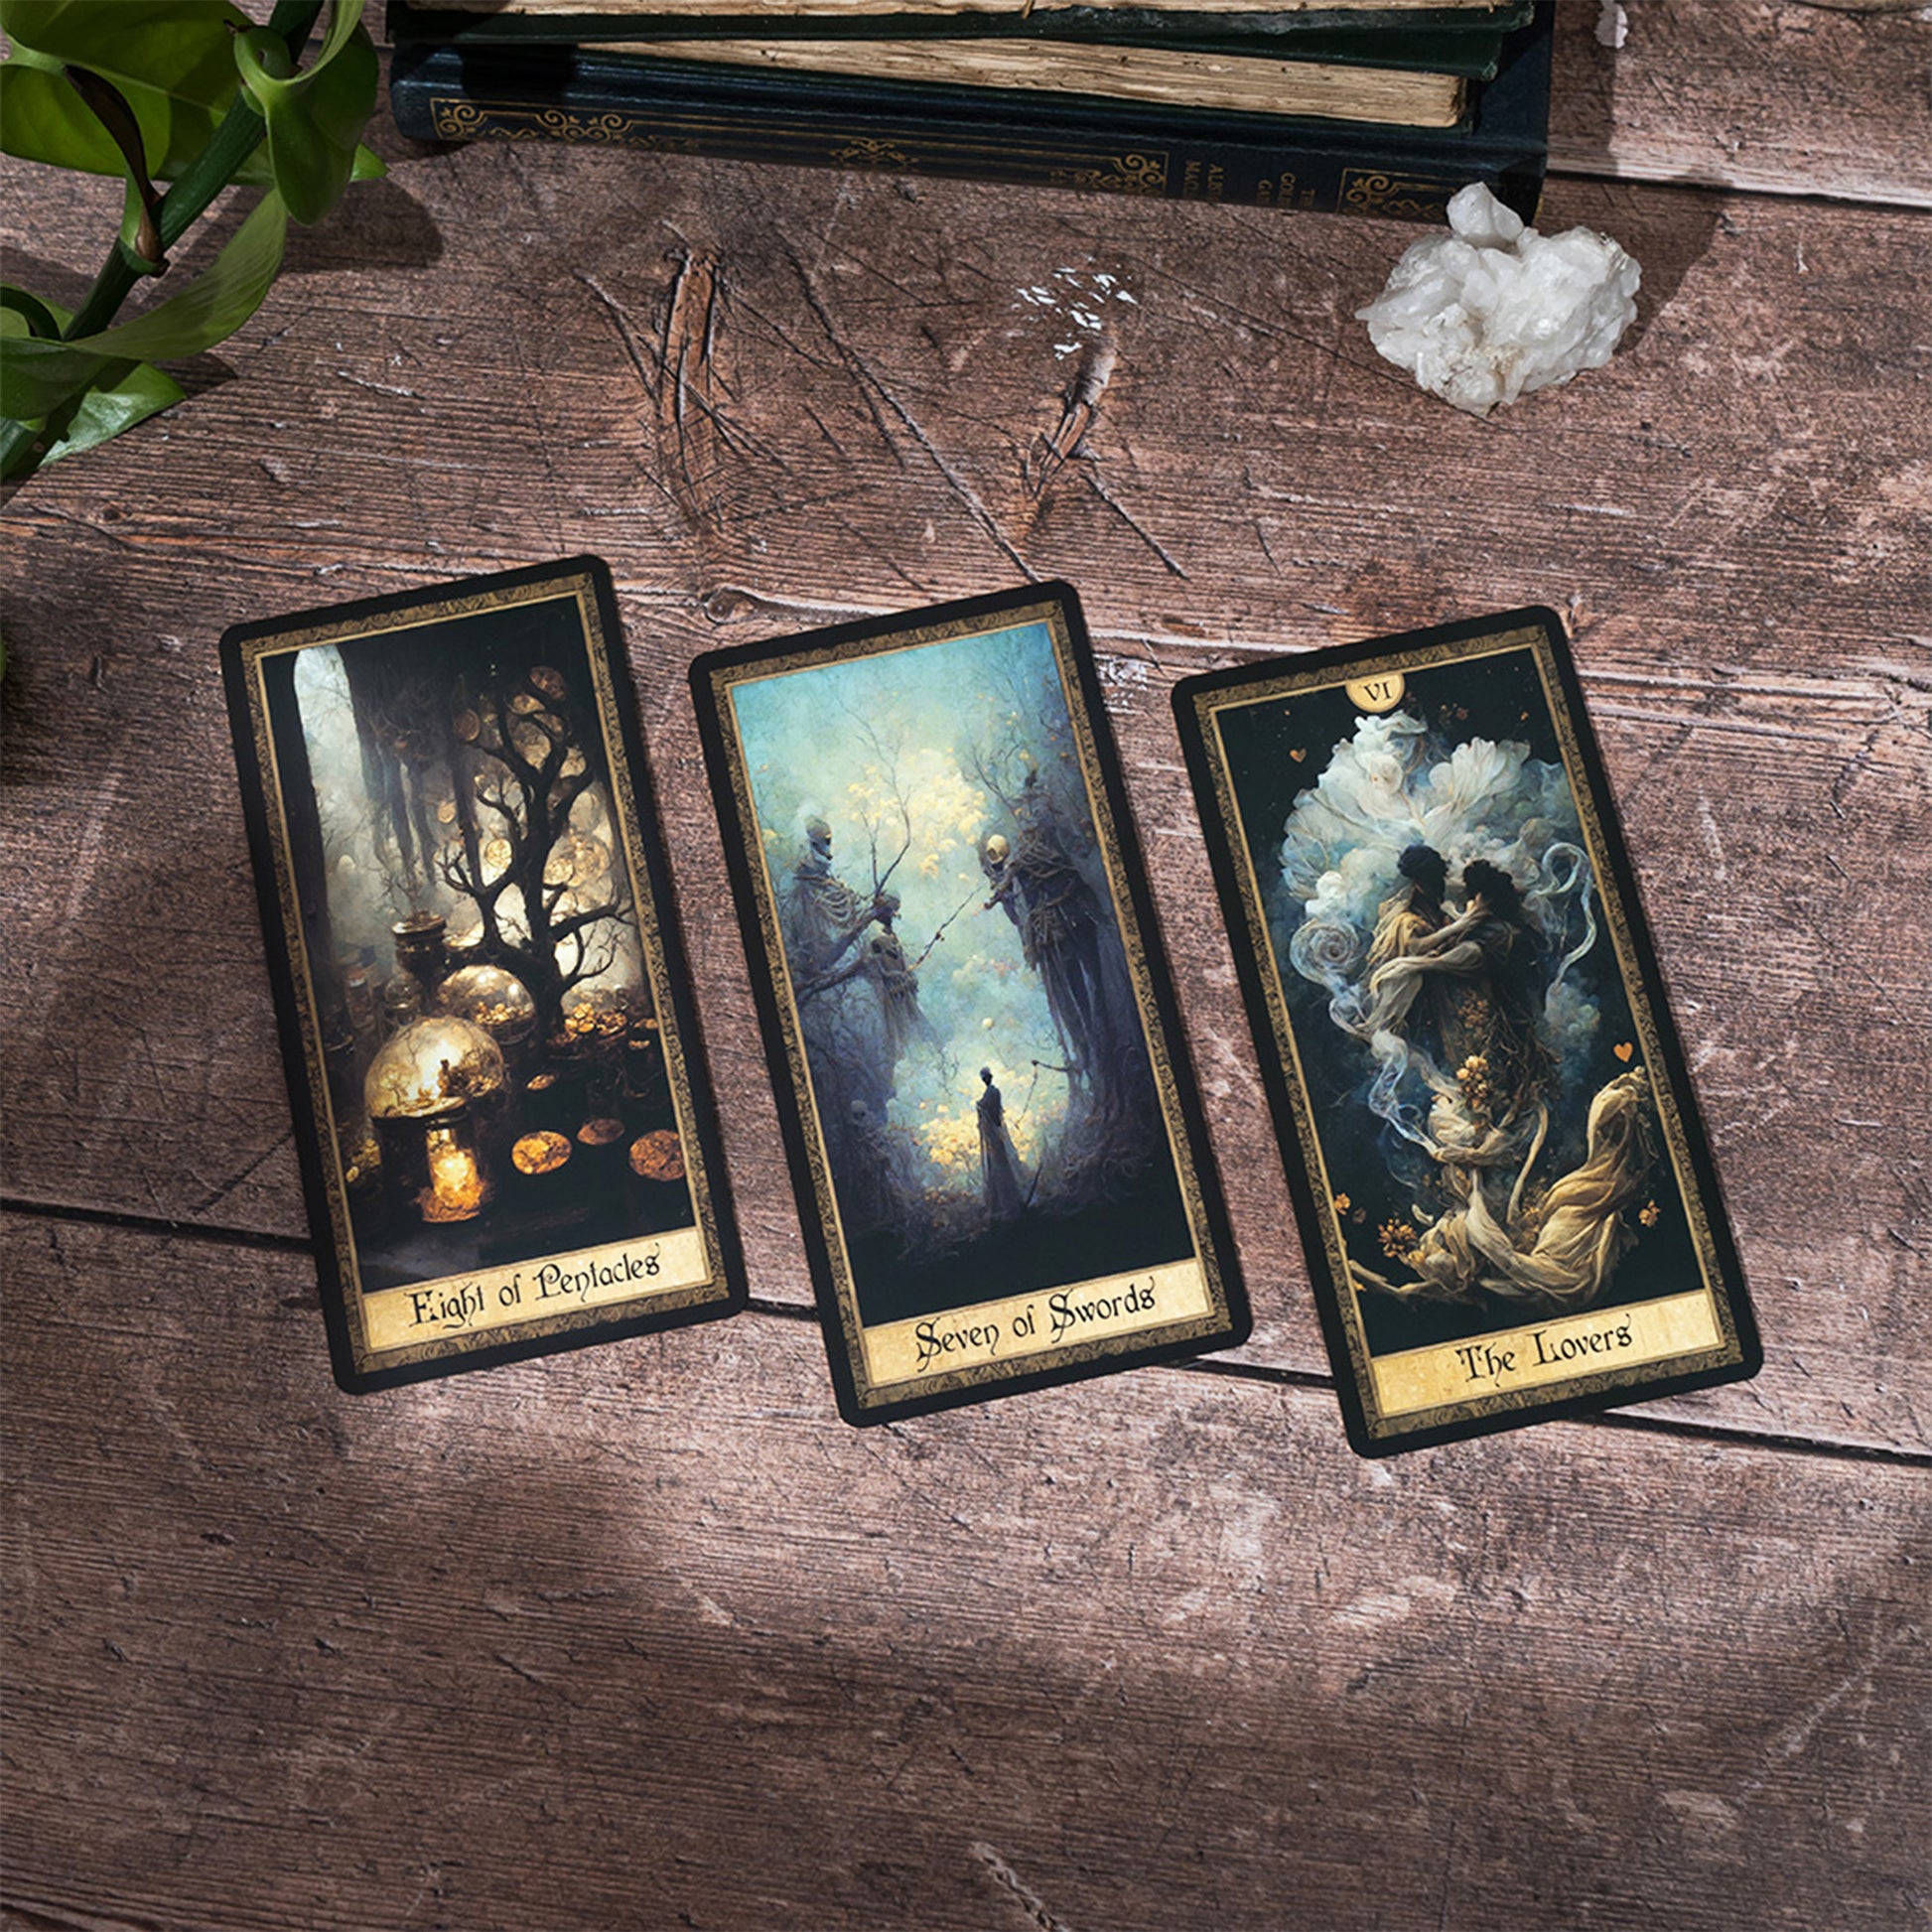 Complete spread of the Shadow Work Tarot Deck, showcasing 78 beautifully illustrated cards with a Victorian-era, antique look, ideal for deep spiritual insights and guidance.